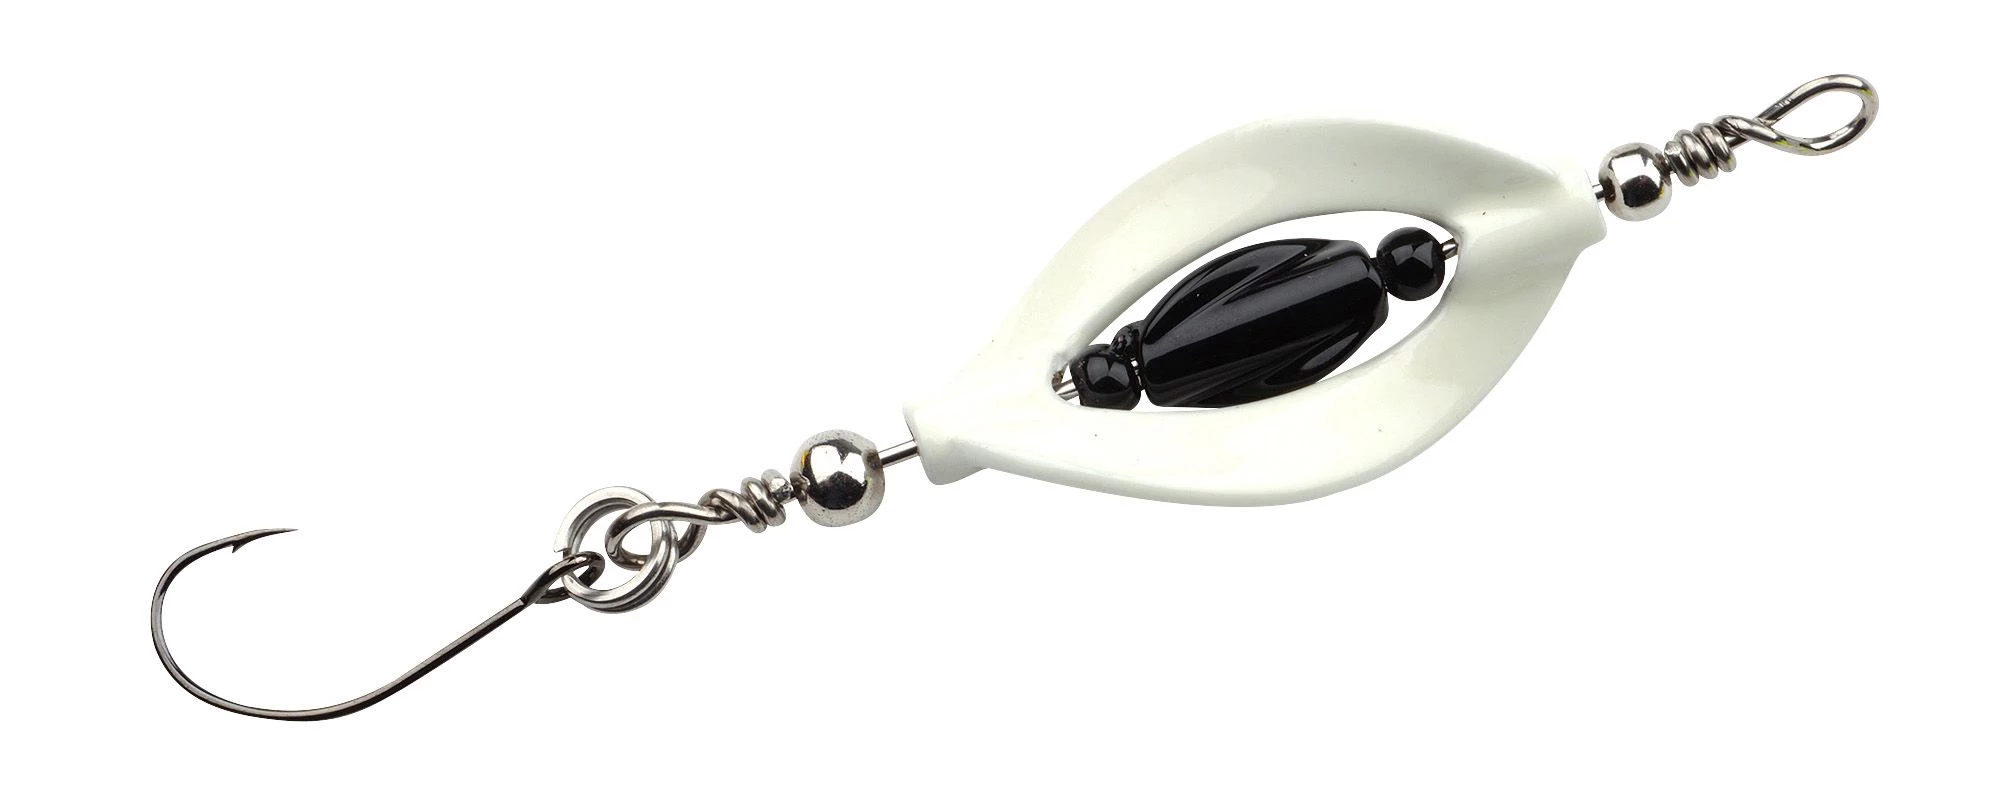 Spro Trout Master Incy Double Spin Spoon 3,3g Black n White